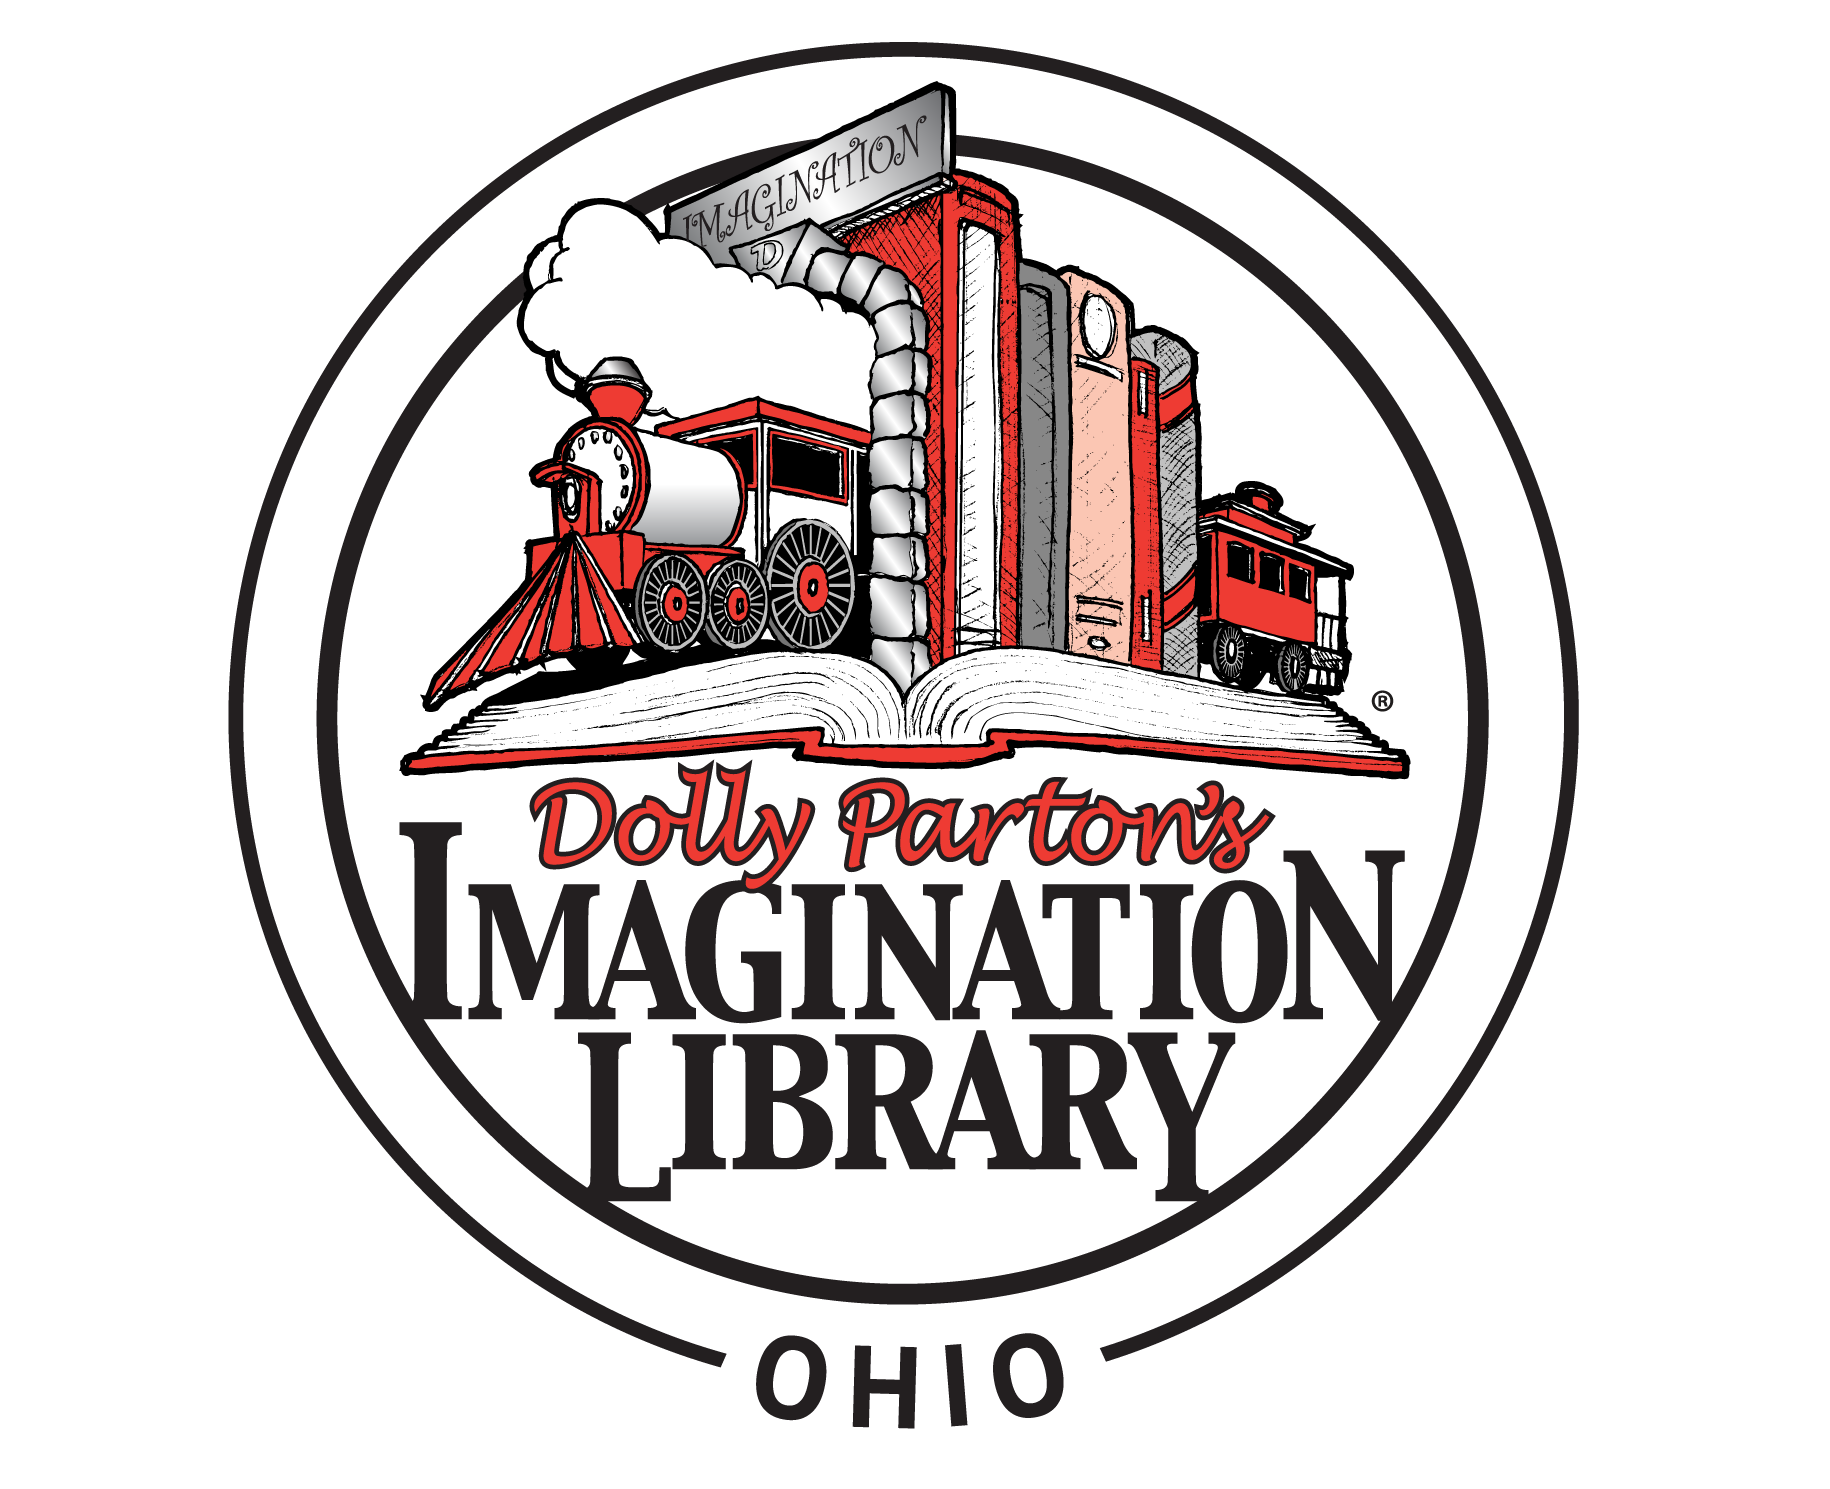 Imagination Library